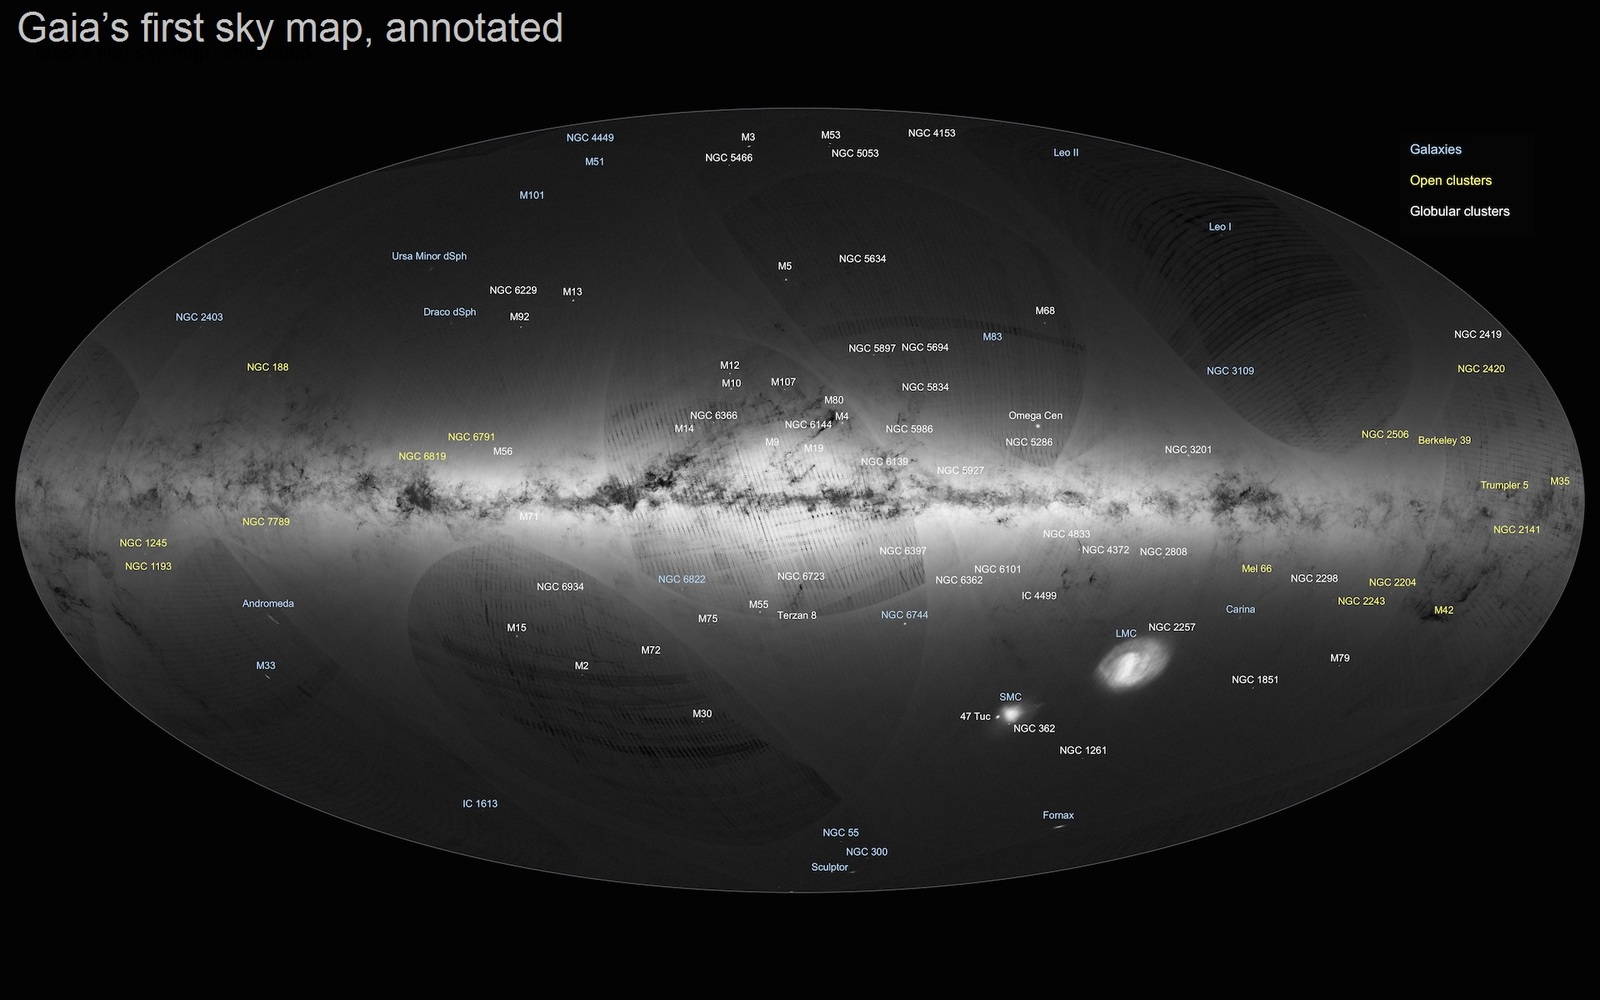 Gaia_s_first_sky_map_annotated2.jpg